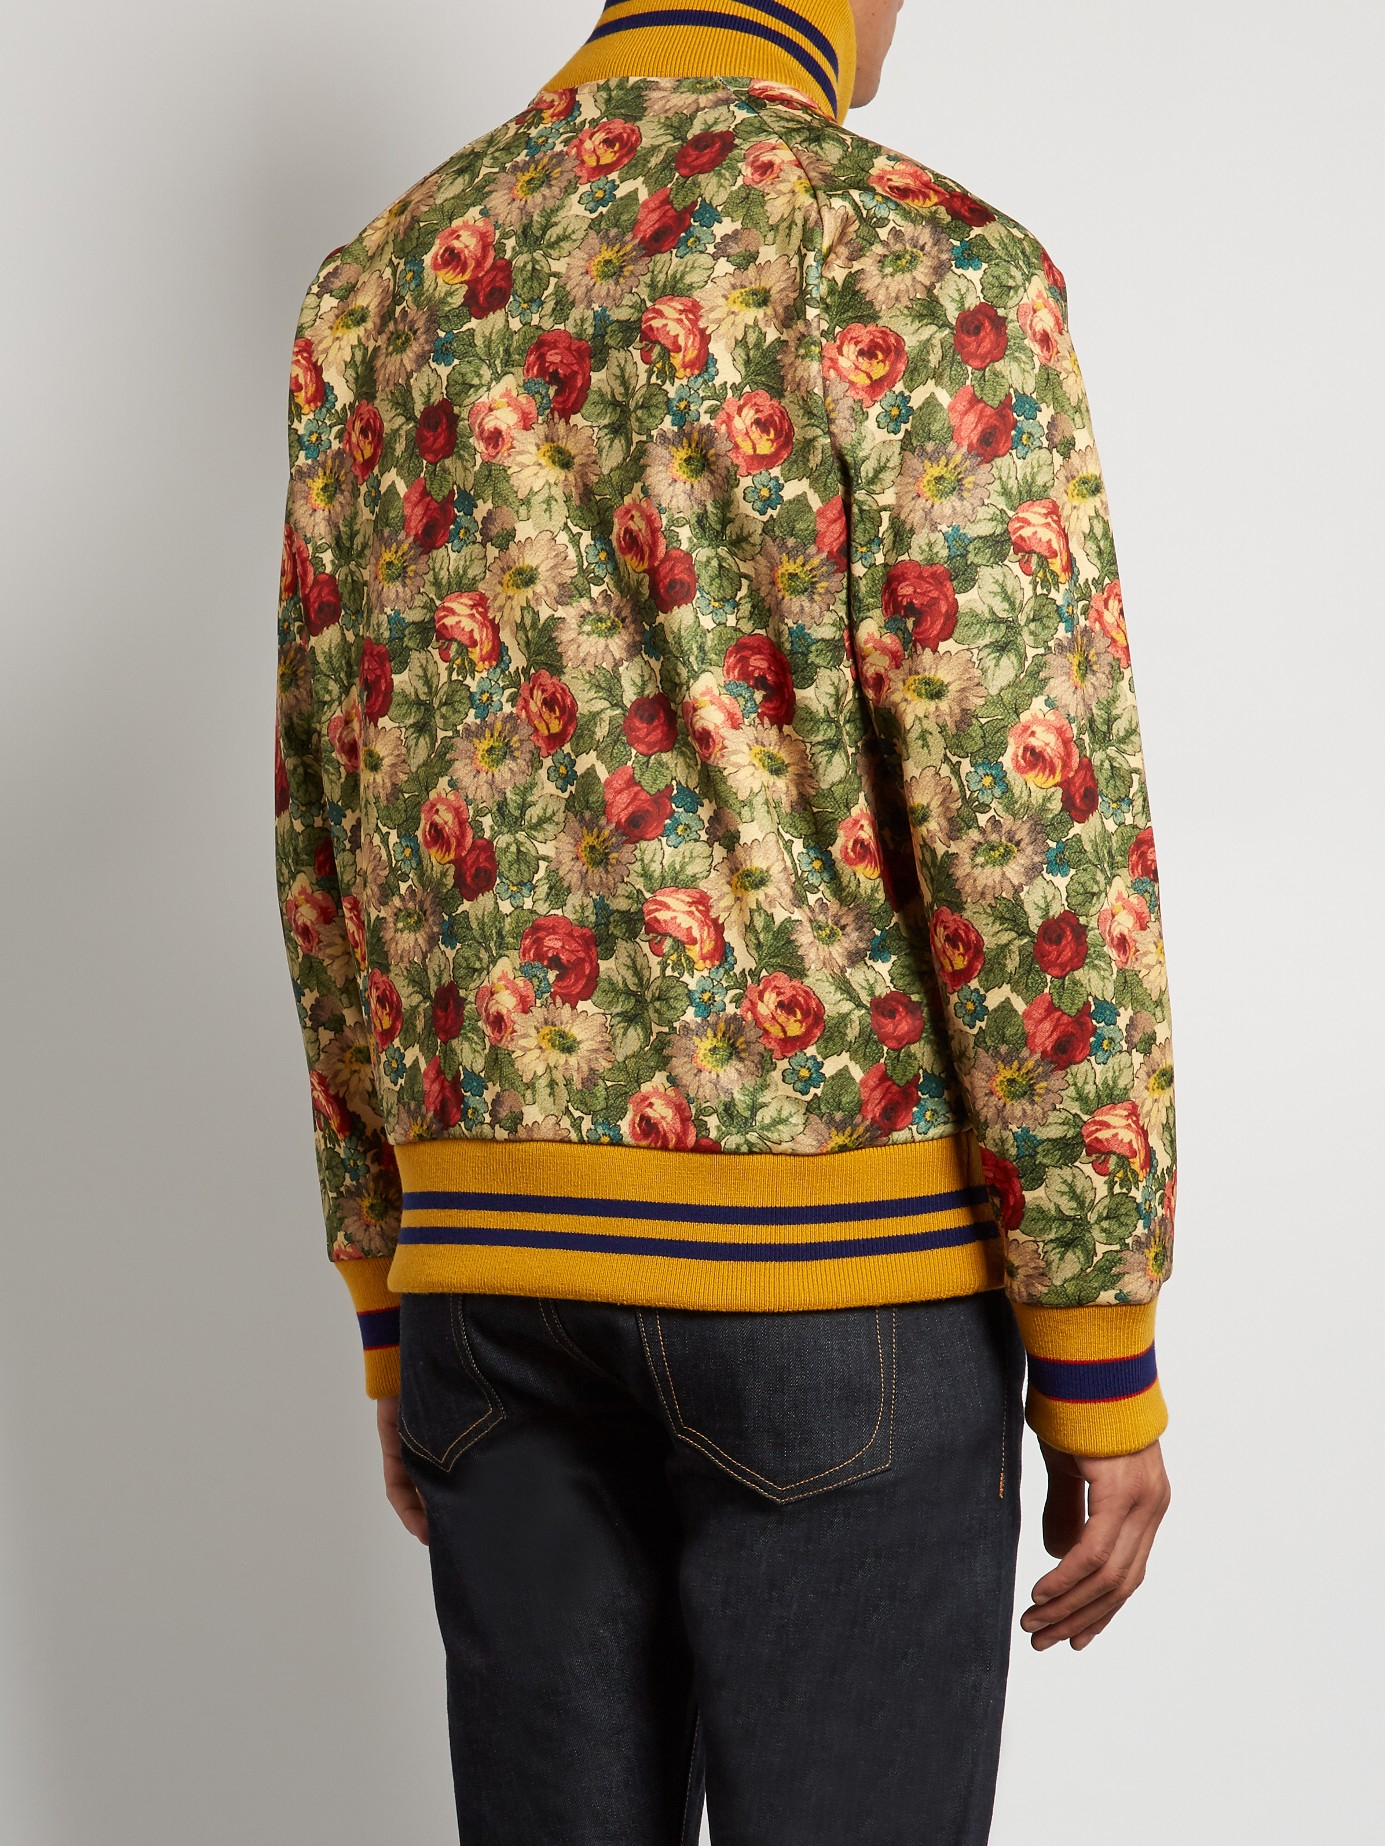 Gucci Synthetic Floral Print Zip Jacket in Blue for Men - Lyst